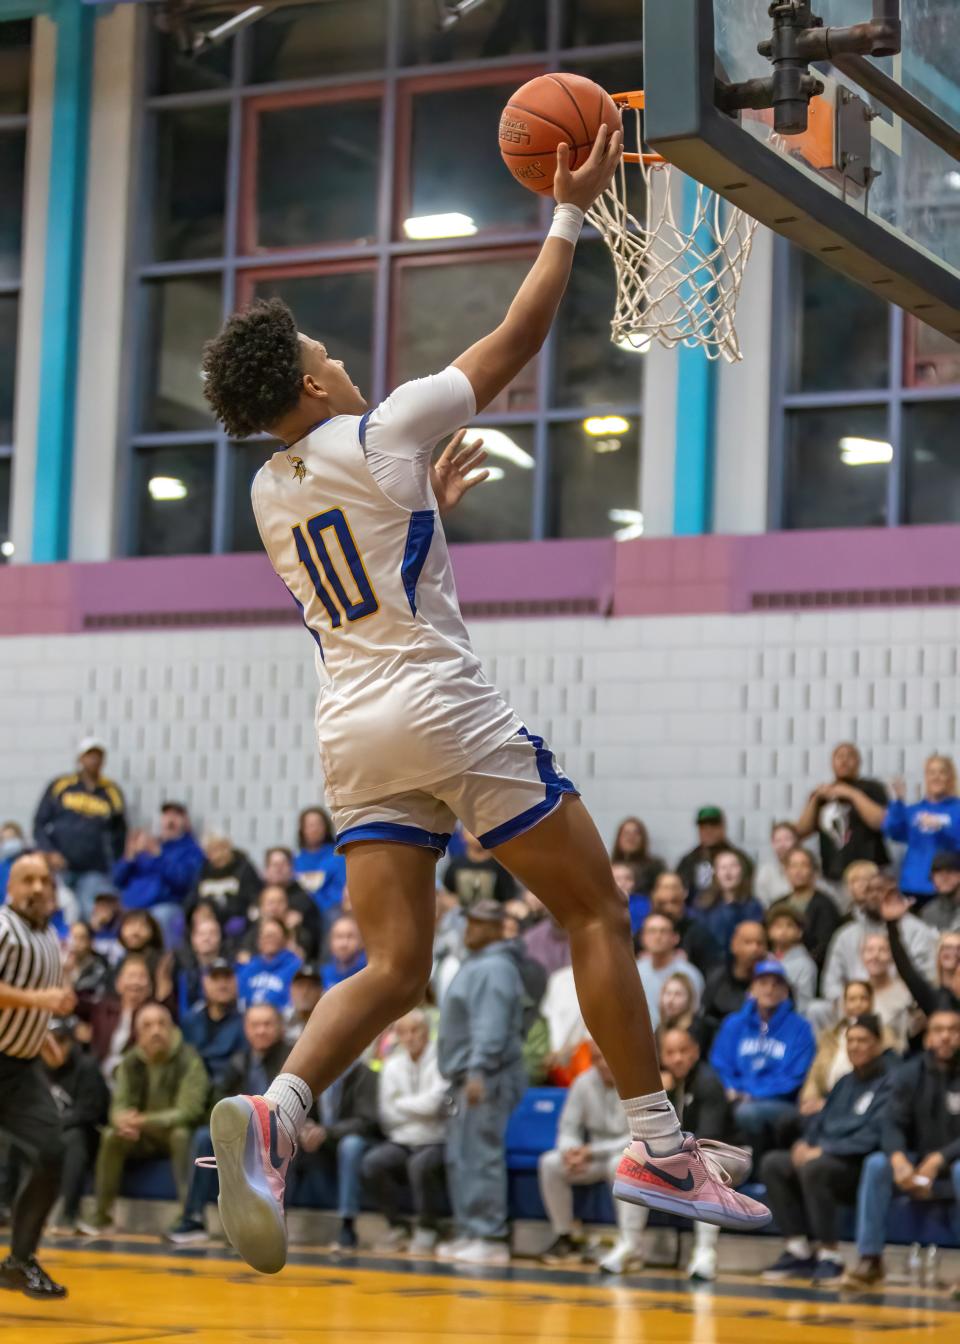 Ajay Lopes (10) of Wareham High School has an uncontested layup after a steal during the first quarter of Friday evening's game against Lynn Voc-Tech.